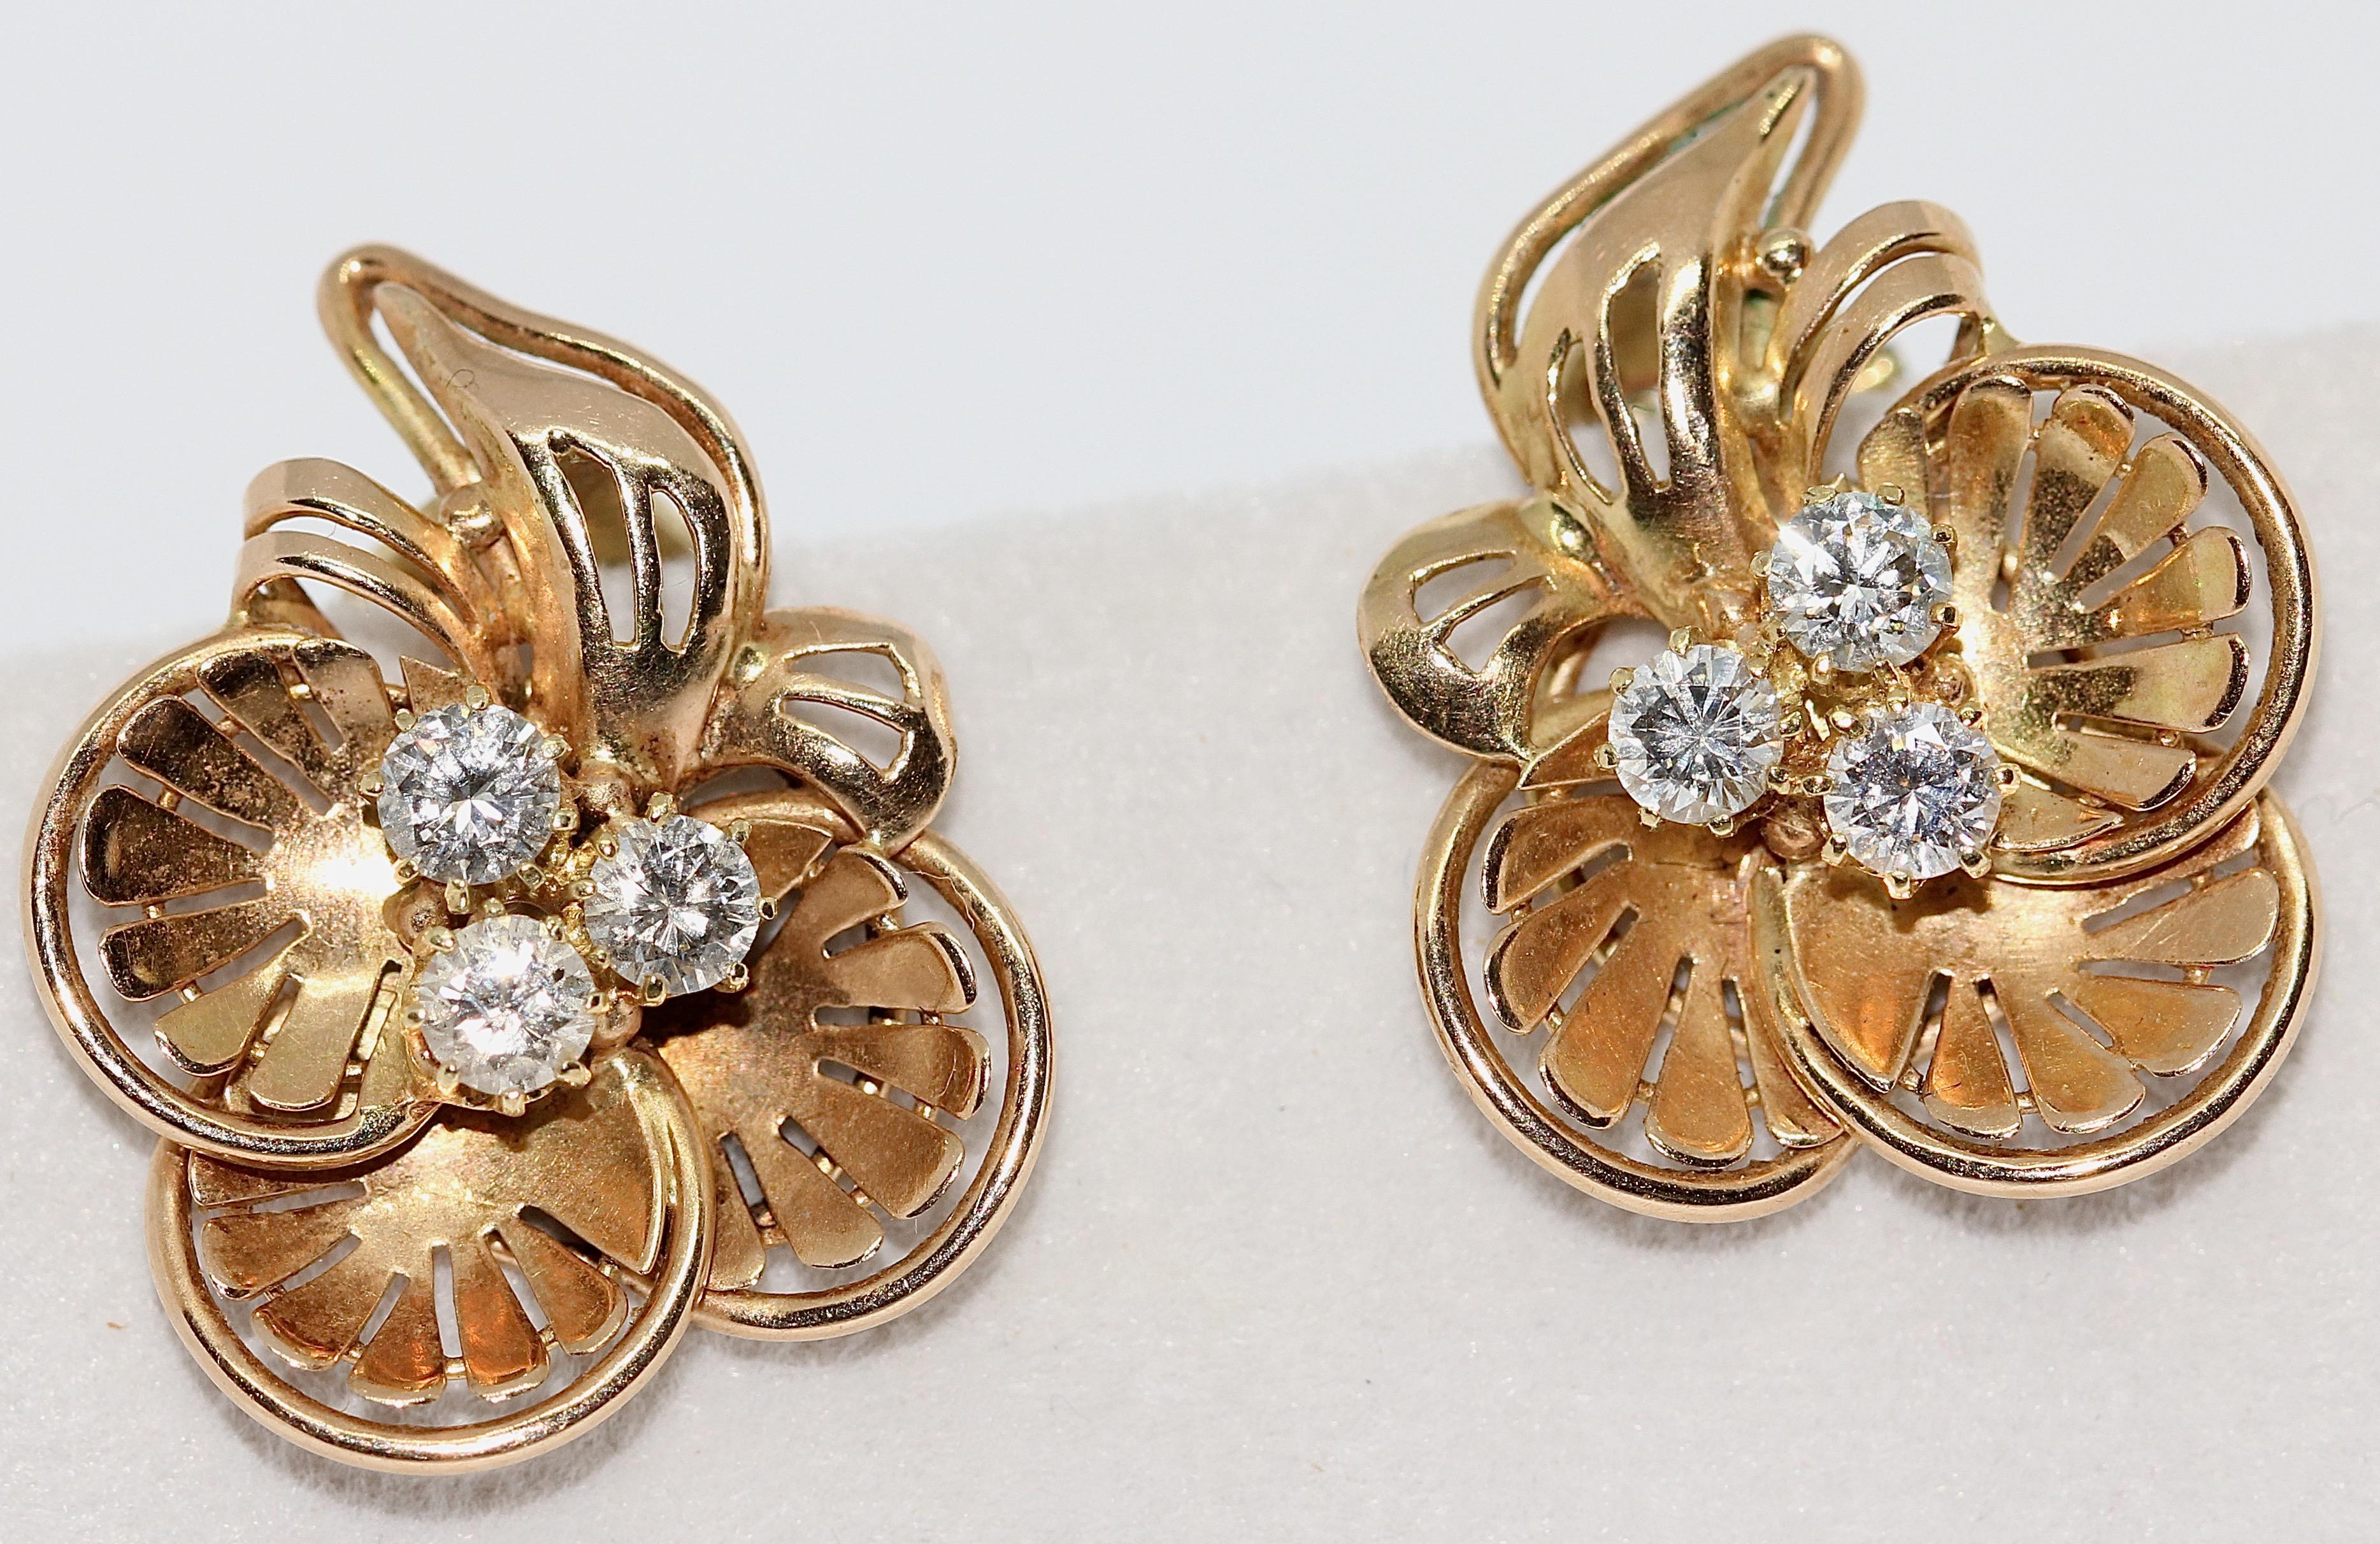 Diamond flower ear clips, rose gold.

Total weight about 0.6 carats.
VS1, G.

Including certificate of authenticity.